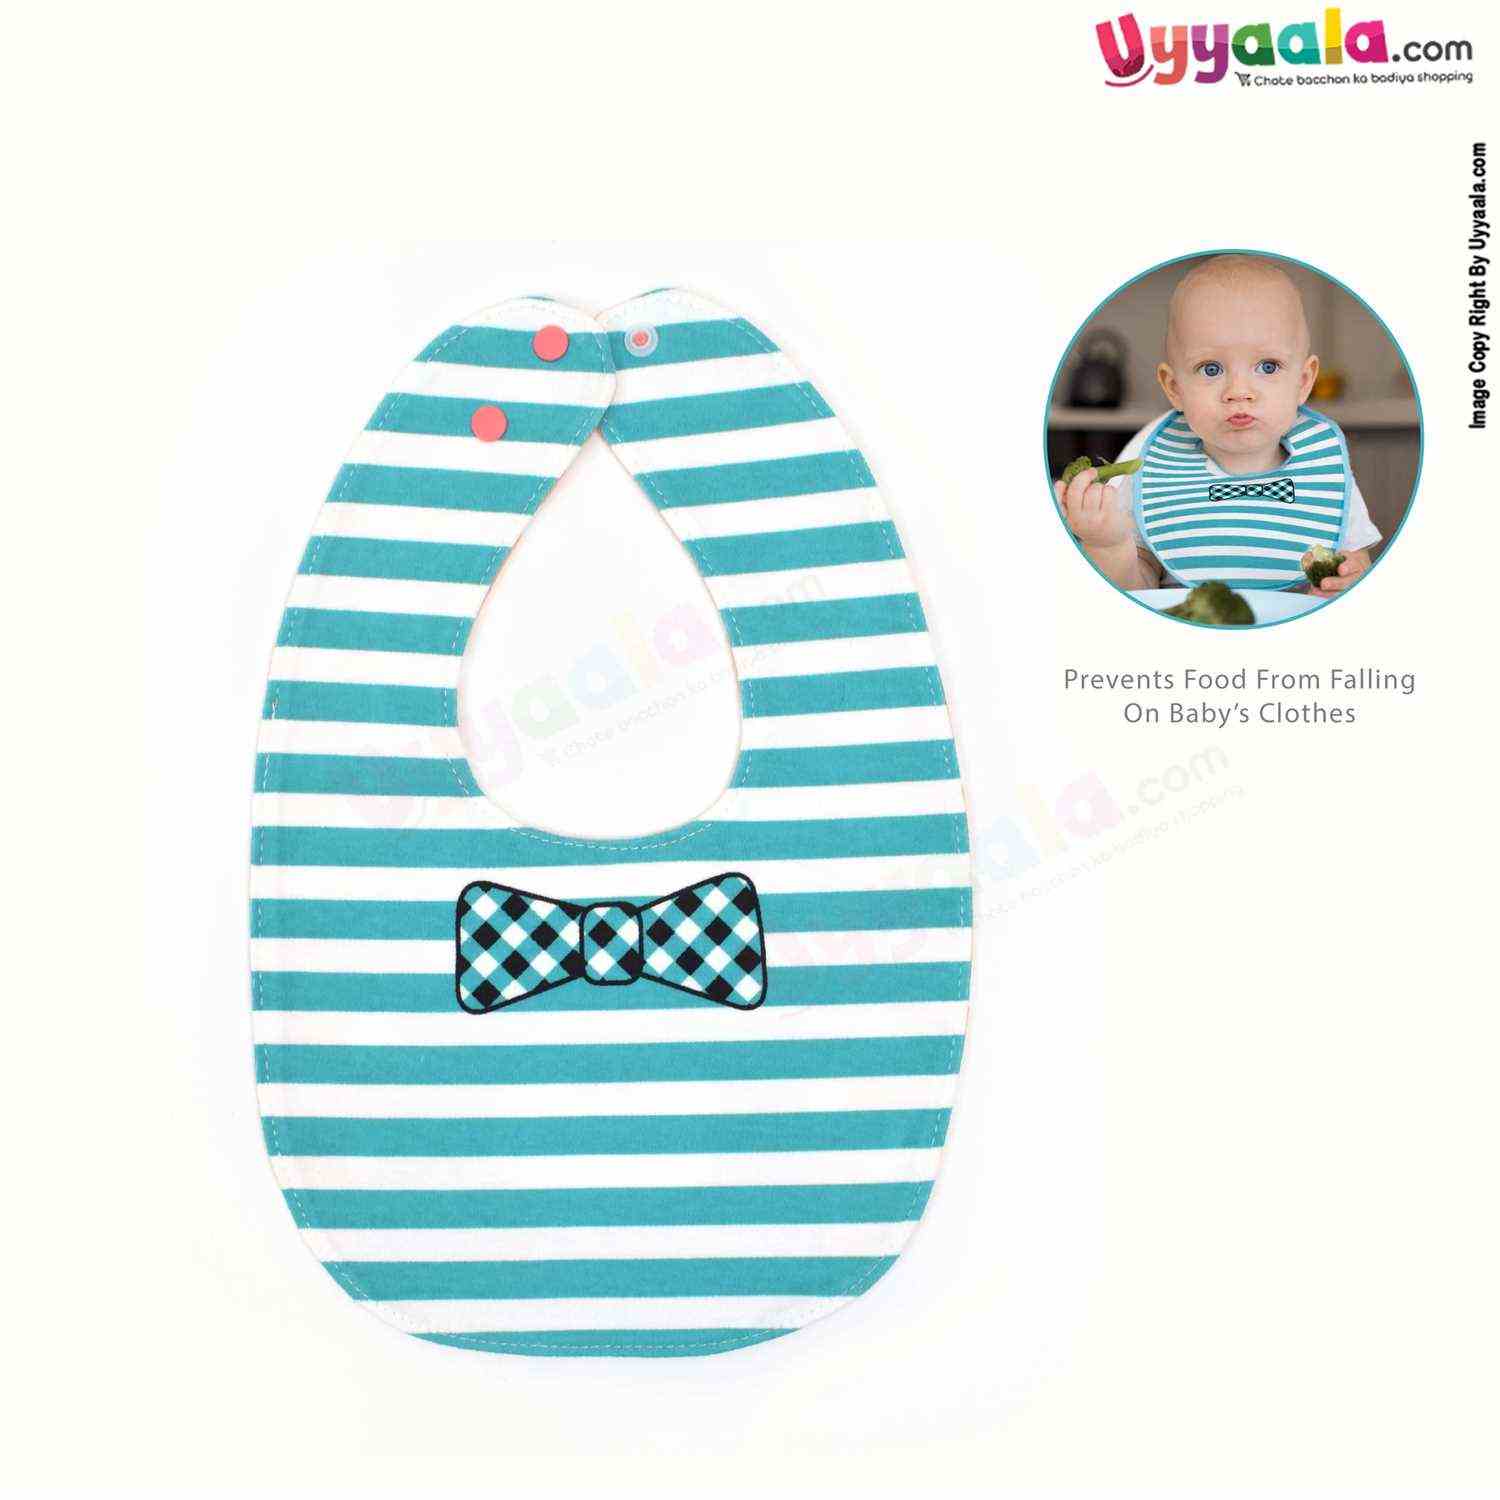 Baby Bib Soft Hosiery Cotton 2 in 1 Usable with Stripes & White Dots Print for Newborn, Size (29.5*20cm) - Light Green & Orange